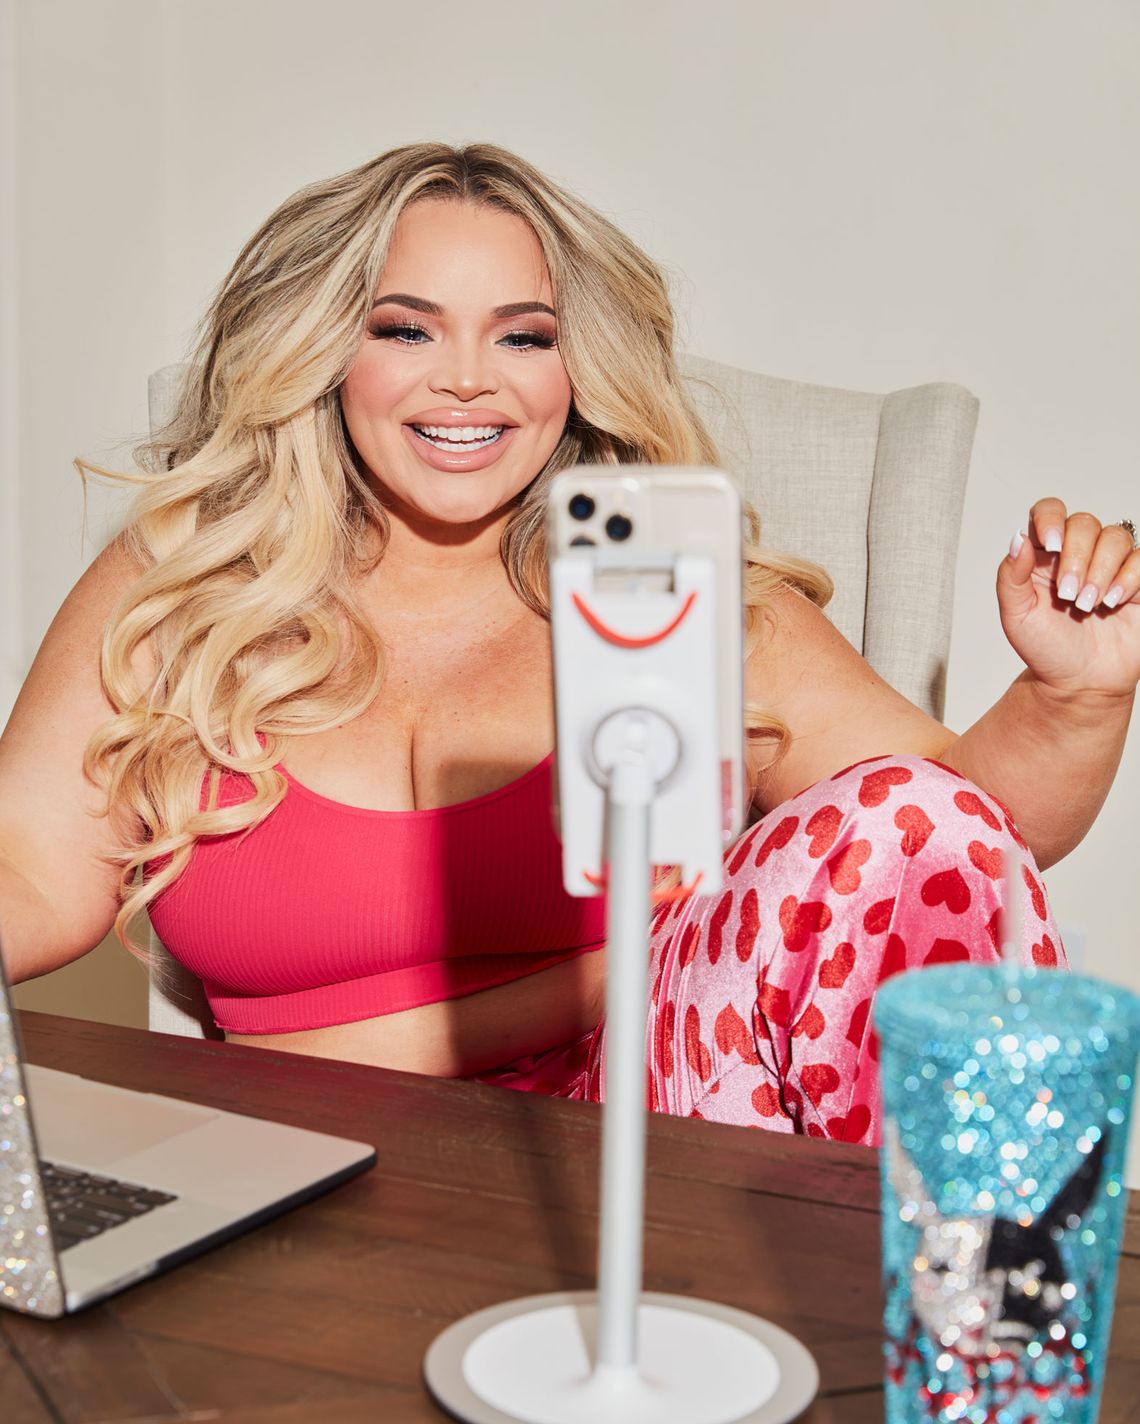 Fans trisha only paytas The Truth